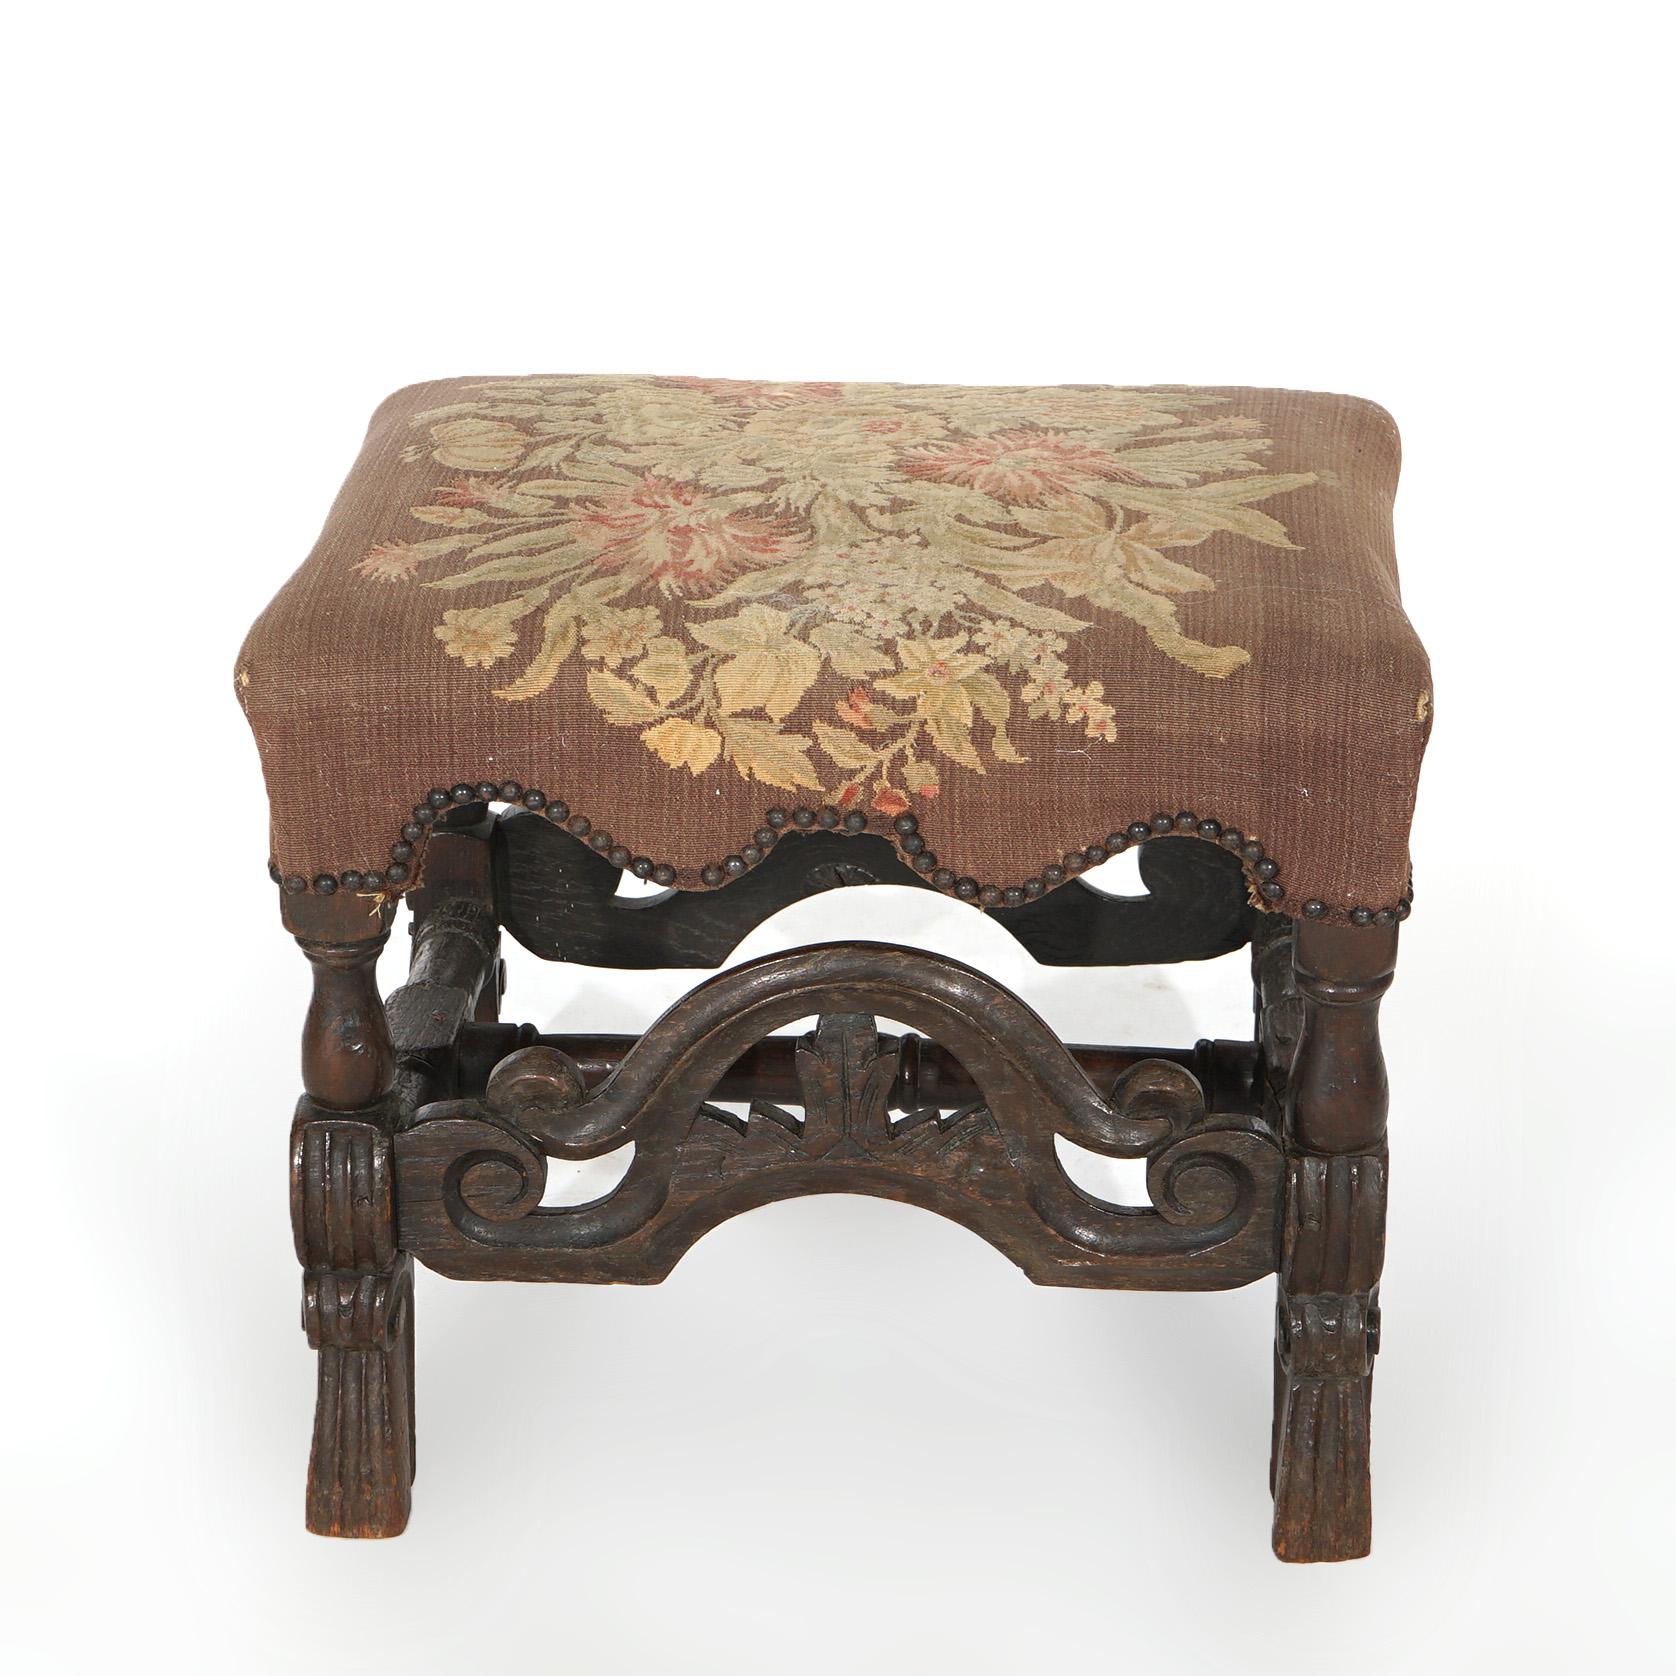 An early antique English bench offers floral needlepoint upholstered seat over walnut base having carved foliate, scroll and reeded elements, c1690

Measures - 17